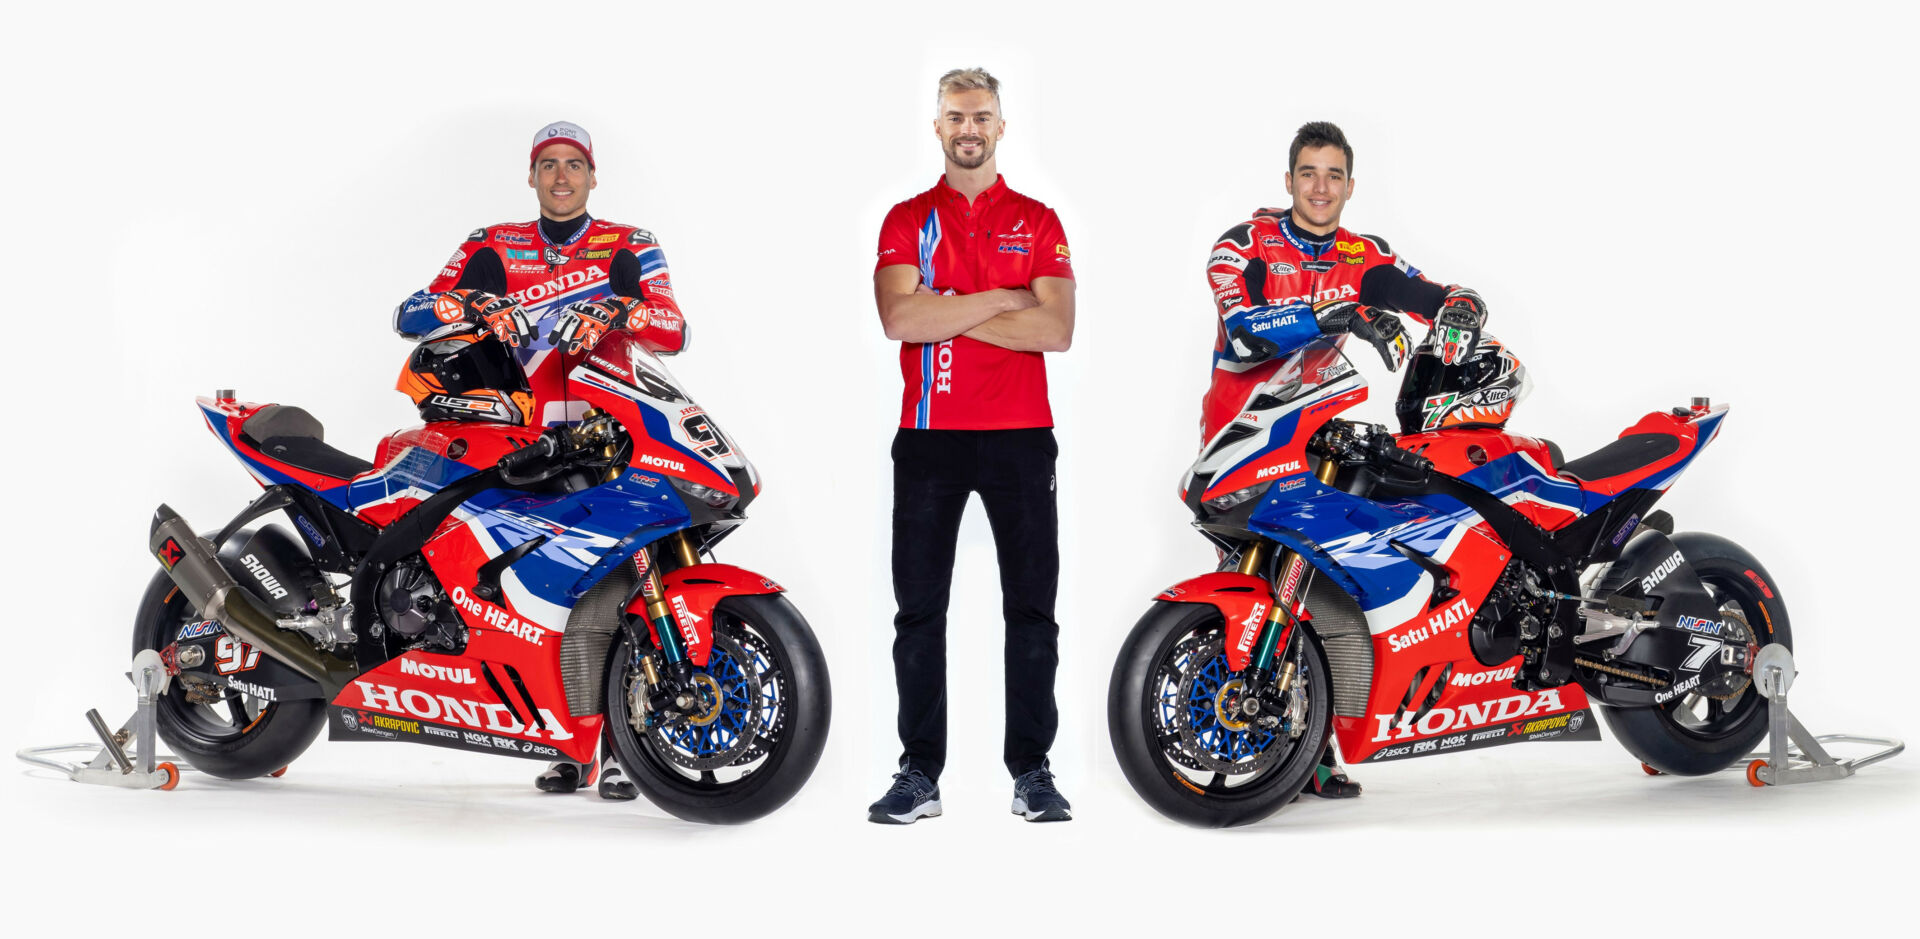 Team HRC Honda riders Xavi Vierge (left) and Iker Lecuona (right) with Team Manager Leon Camier. Photo courtesy Team HRC.